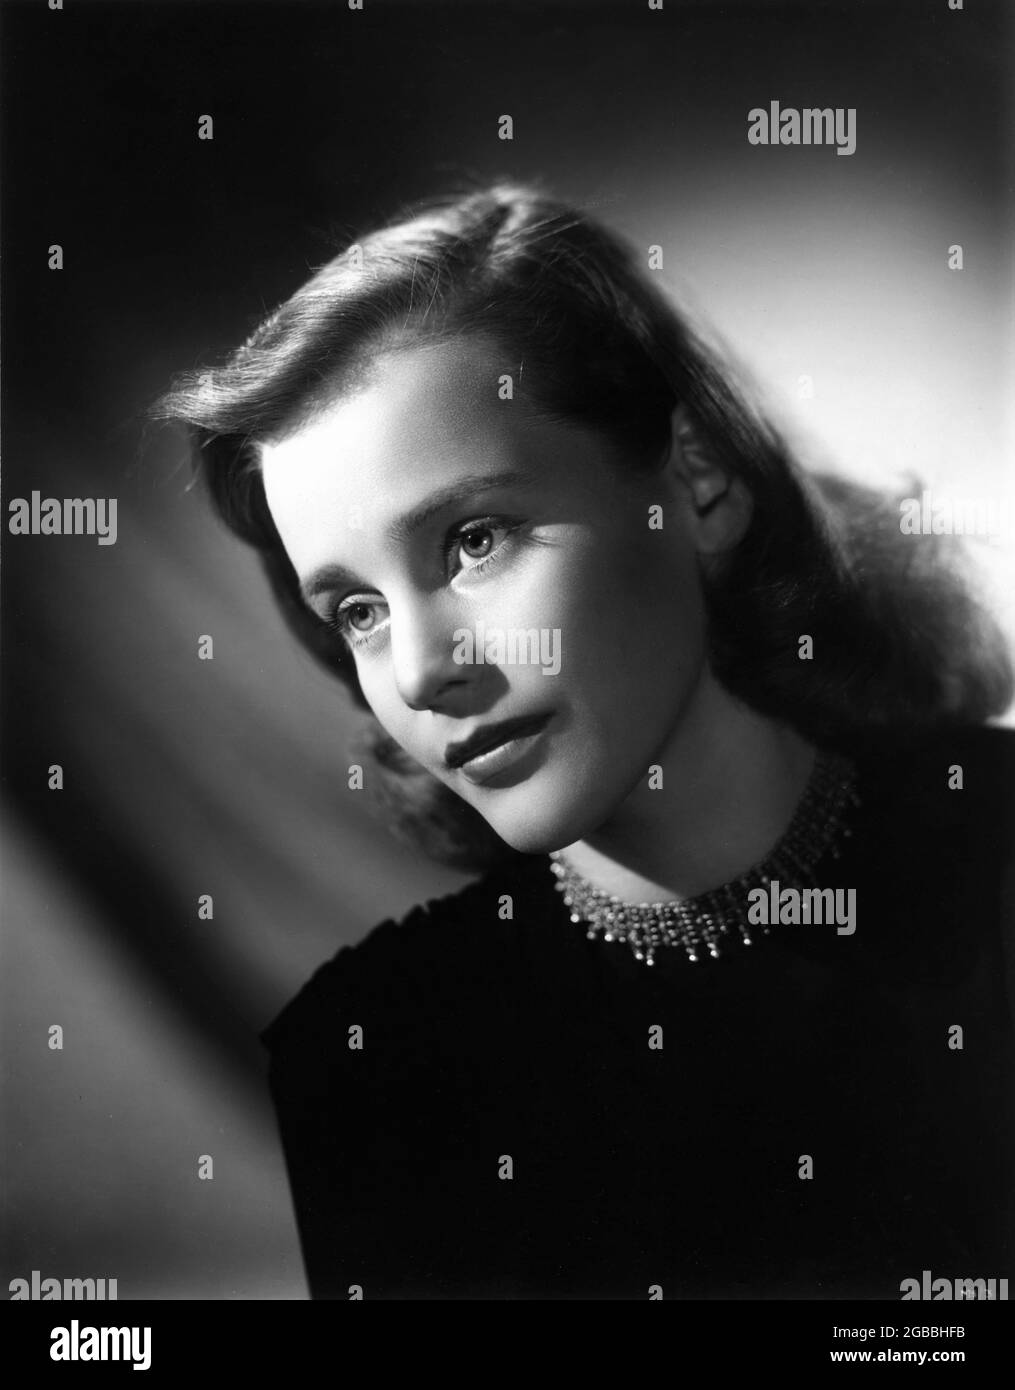 MARIA SCHELL Portrait publicity for THE ANGEL WITH THE TRUMPET 1950 director ANTHONY BUSHELL London Film Productions / British Lion Film Corporation Stock Photo